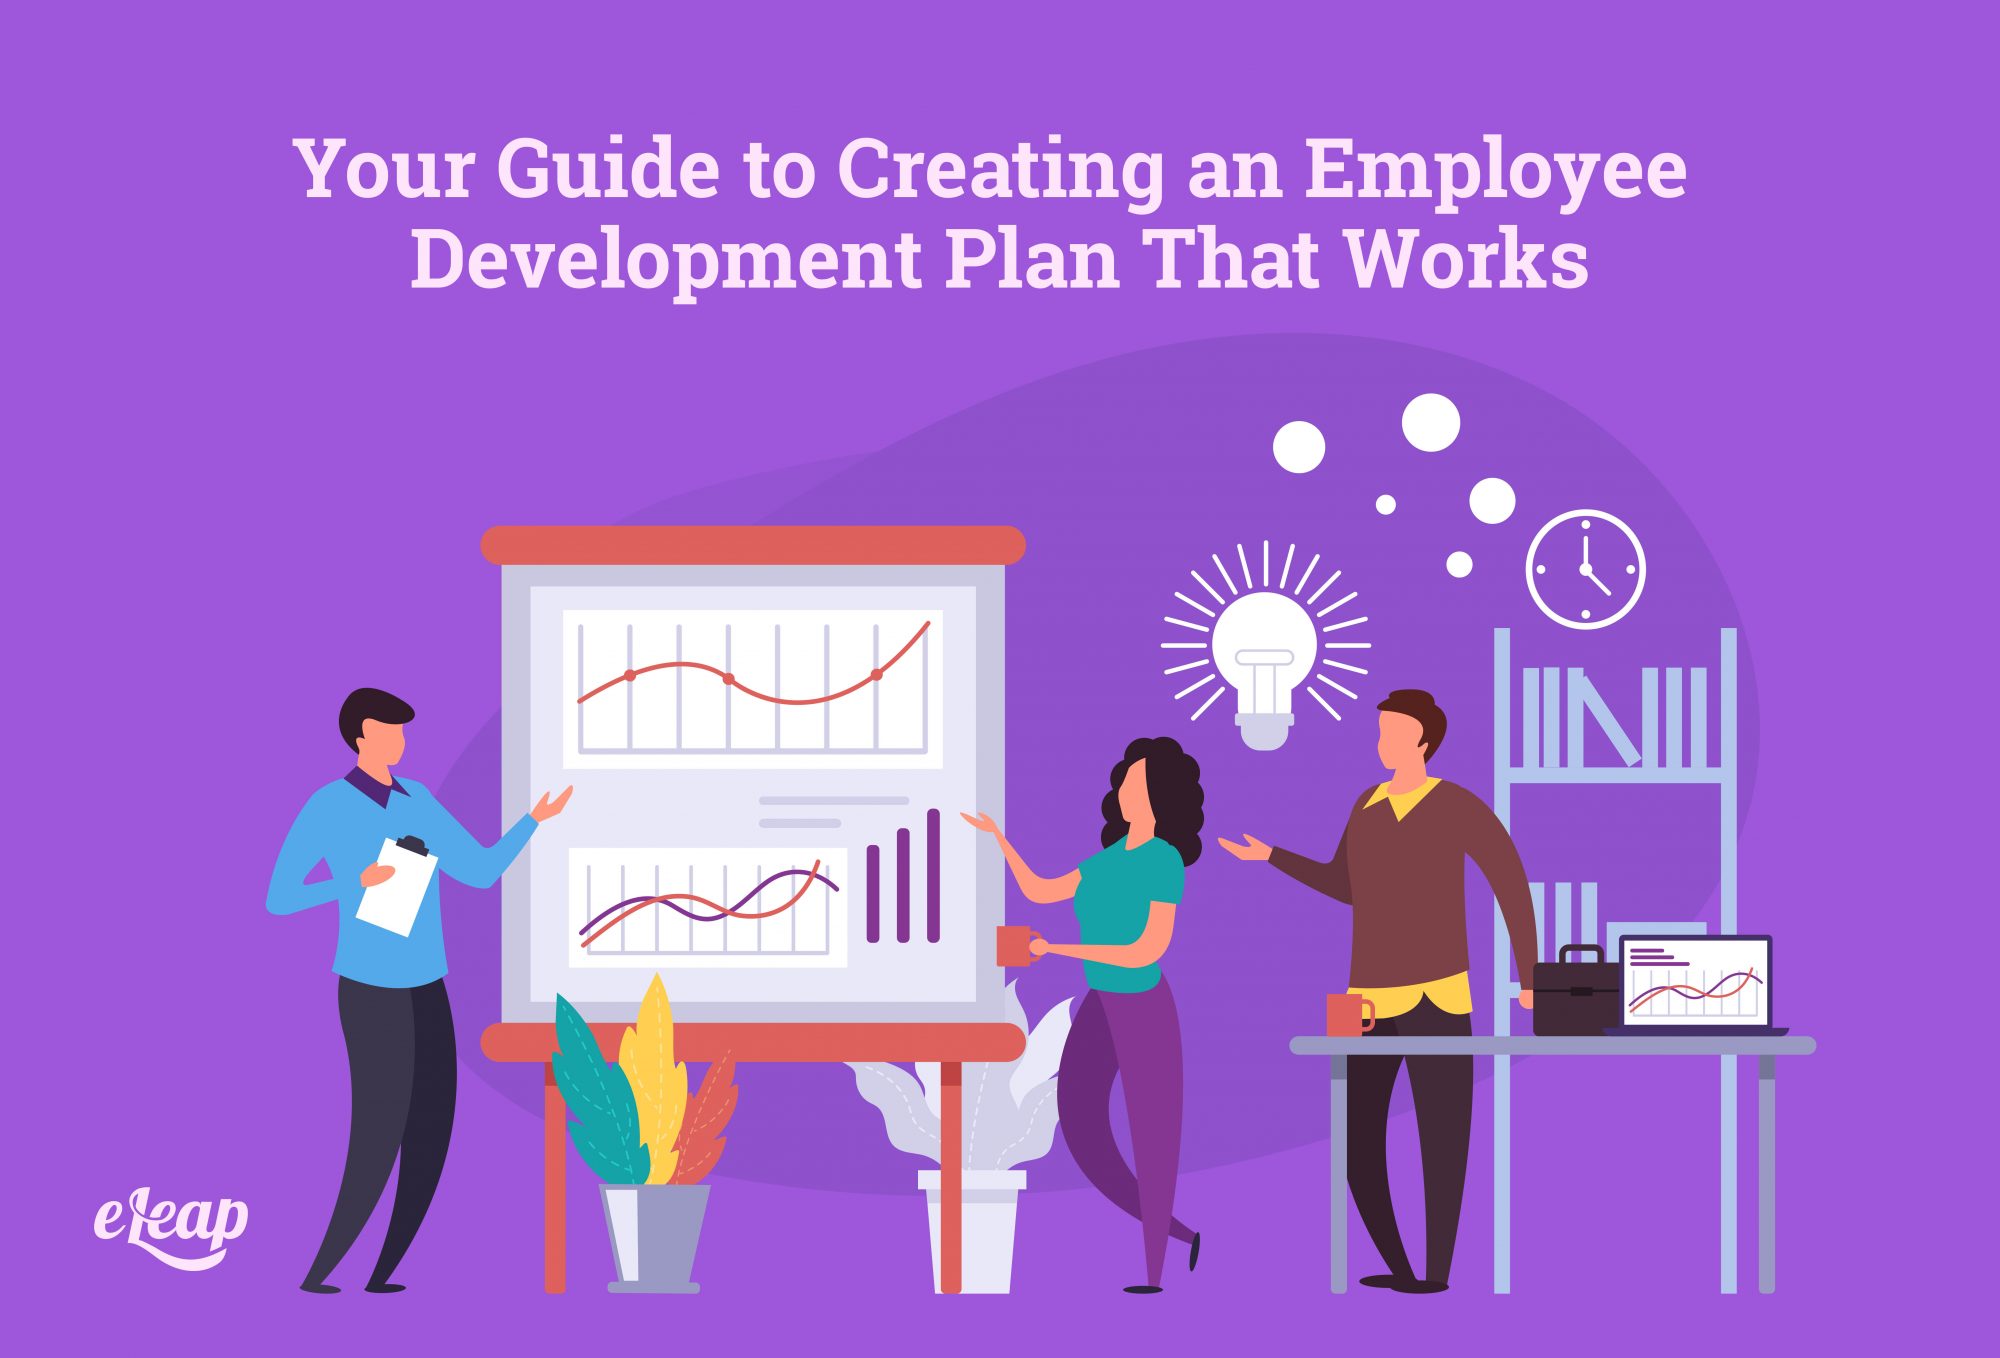 Your Guide to Creating an Employee Development Plan That Works